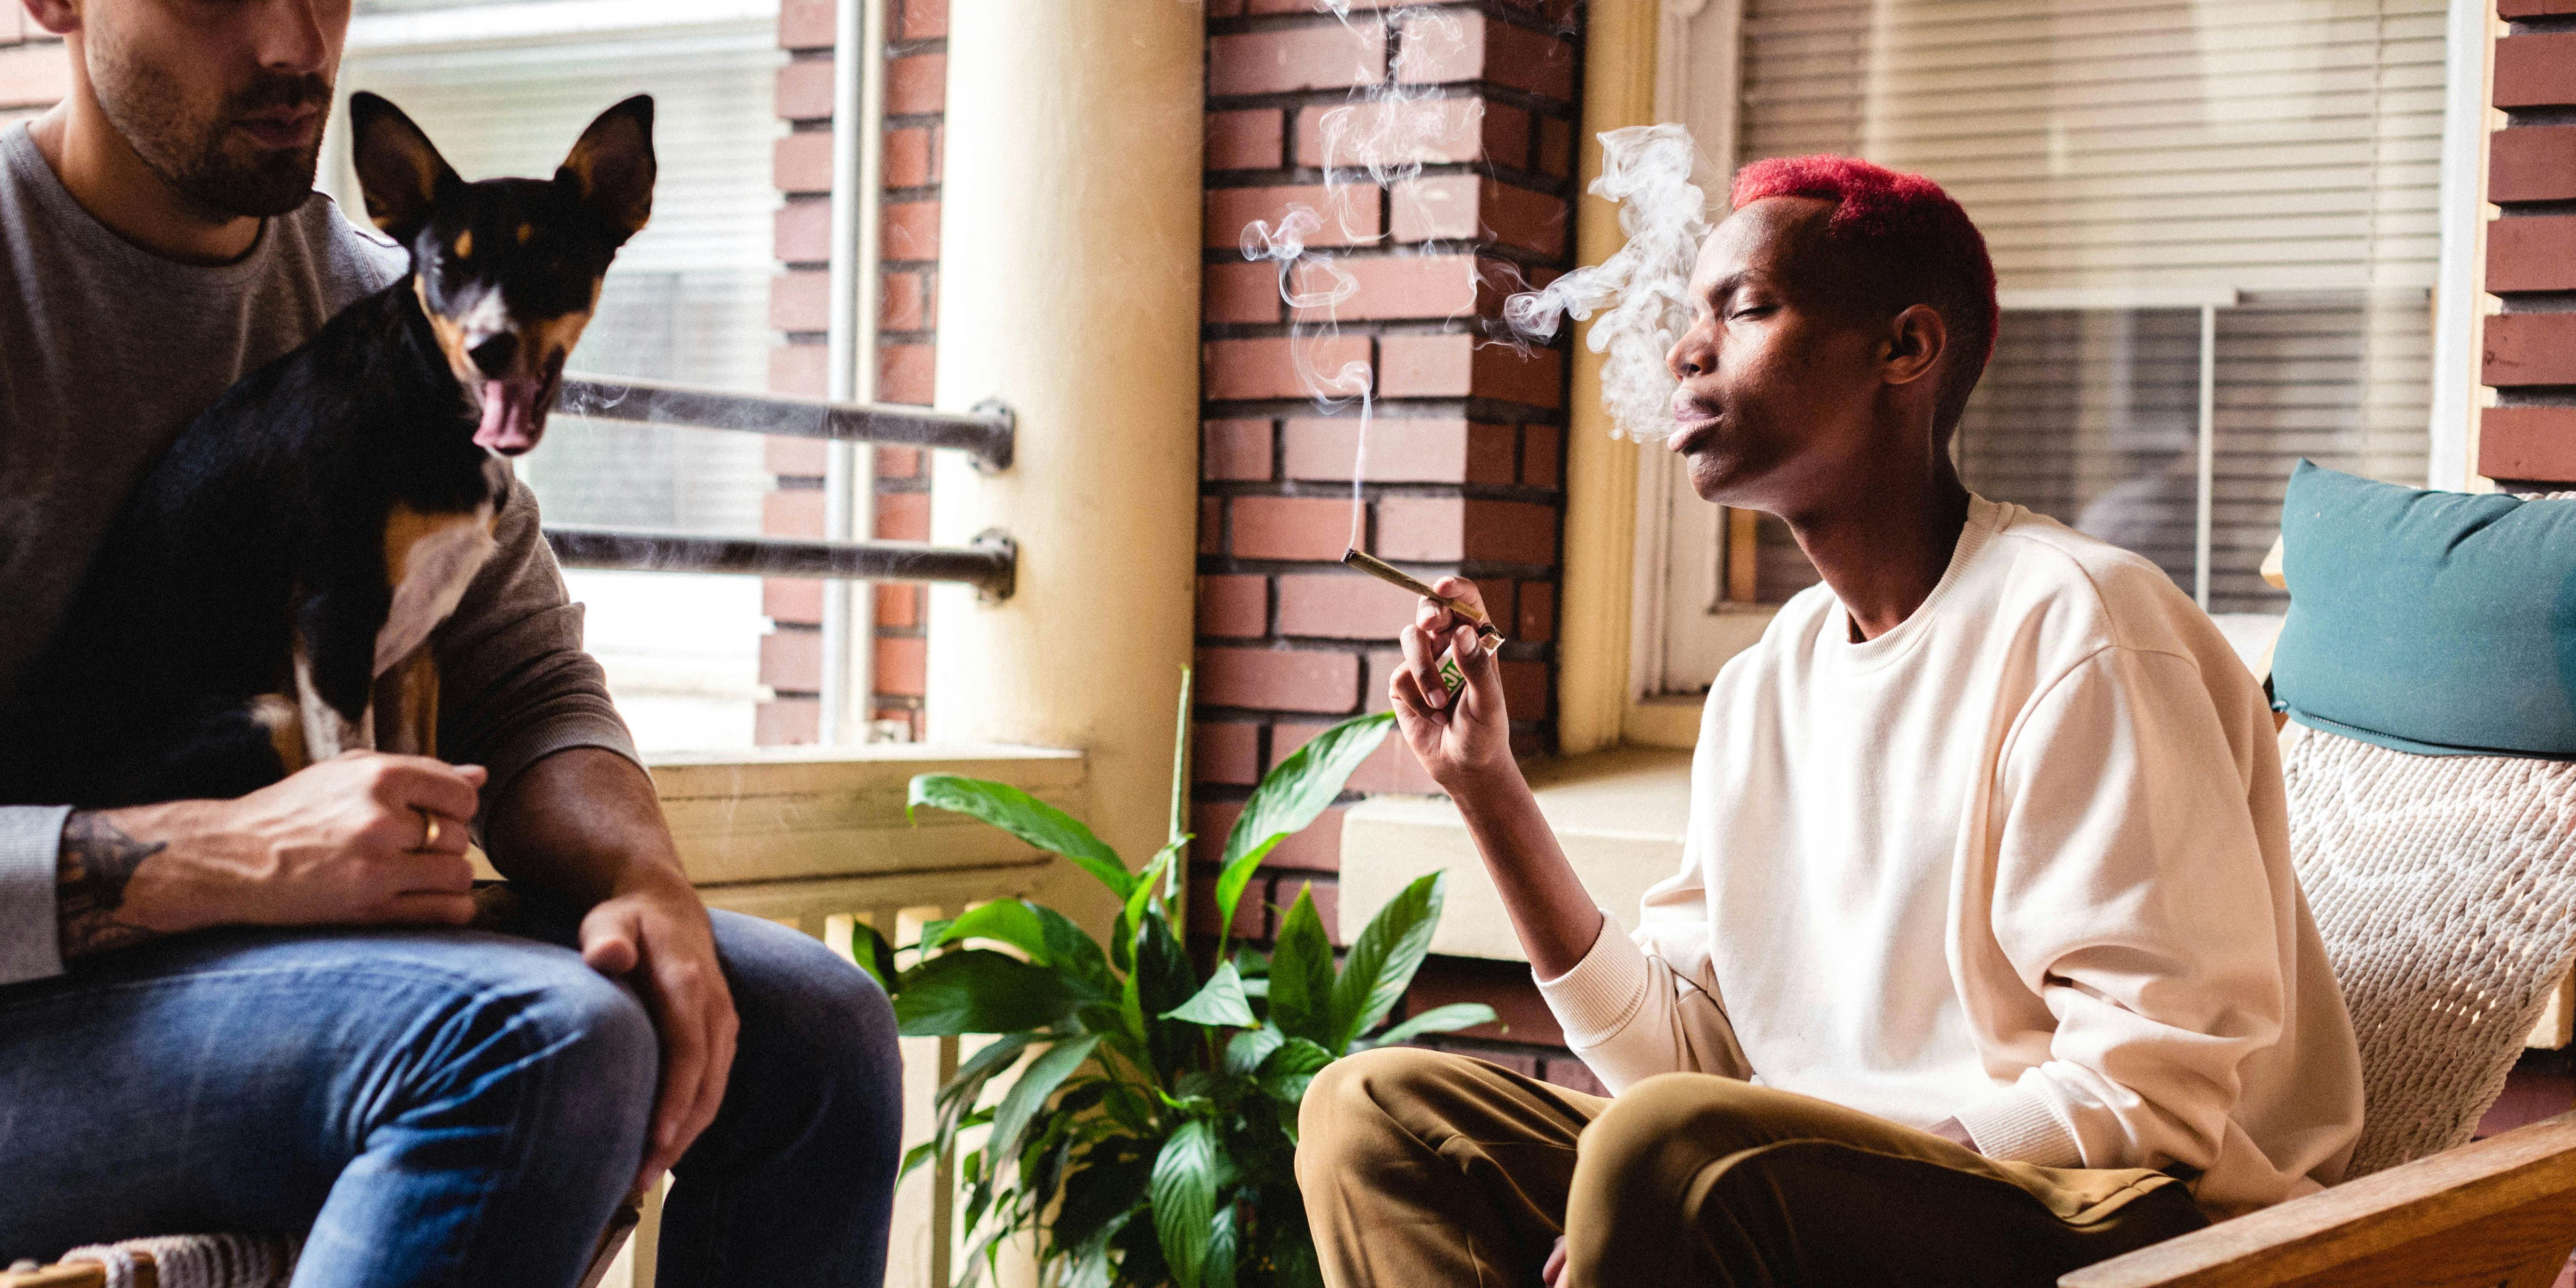 In this article we explore the health benefits of marijuana. Here, a man smokes a joint on the couch with his friend